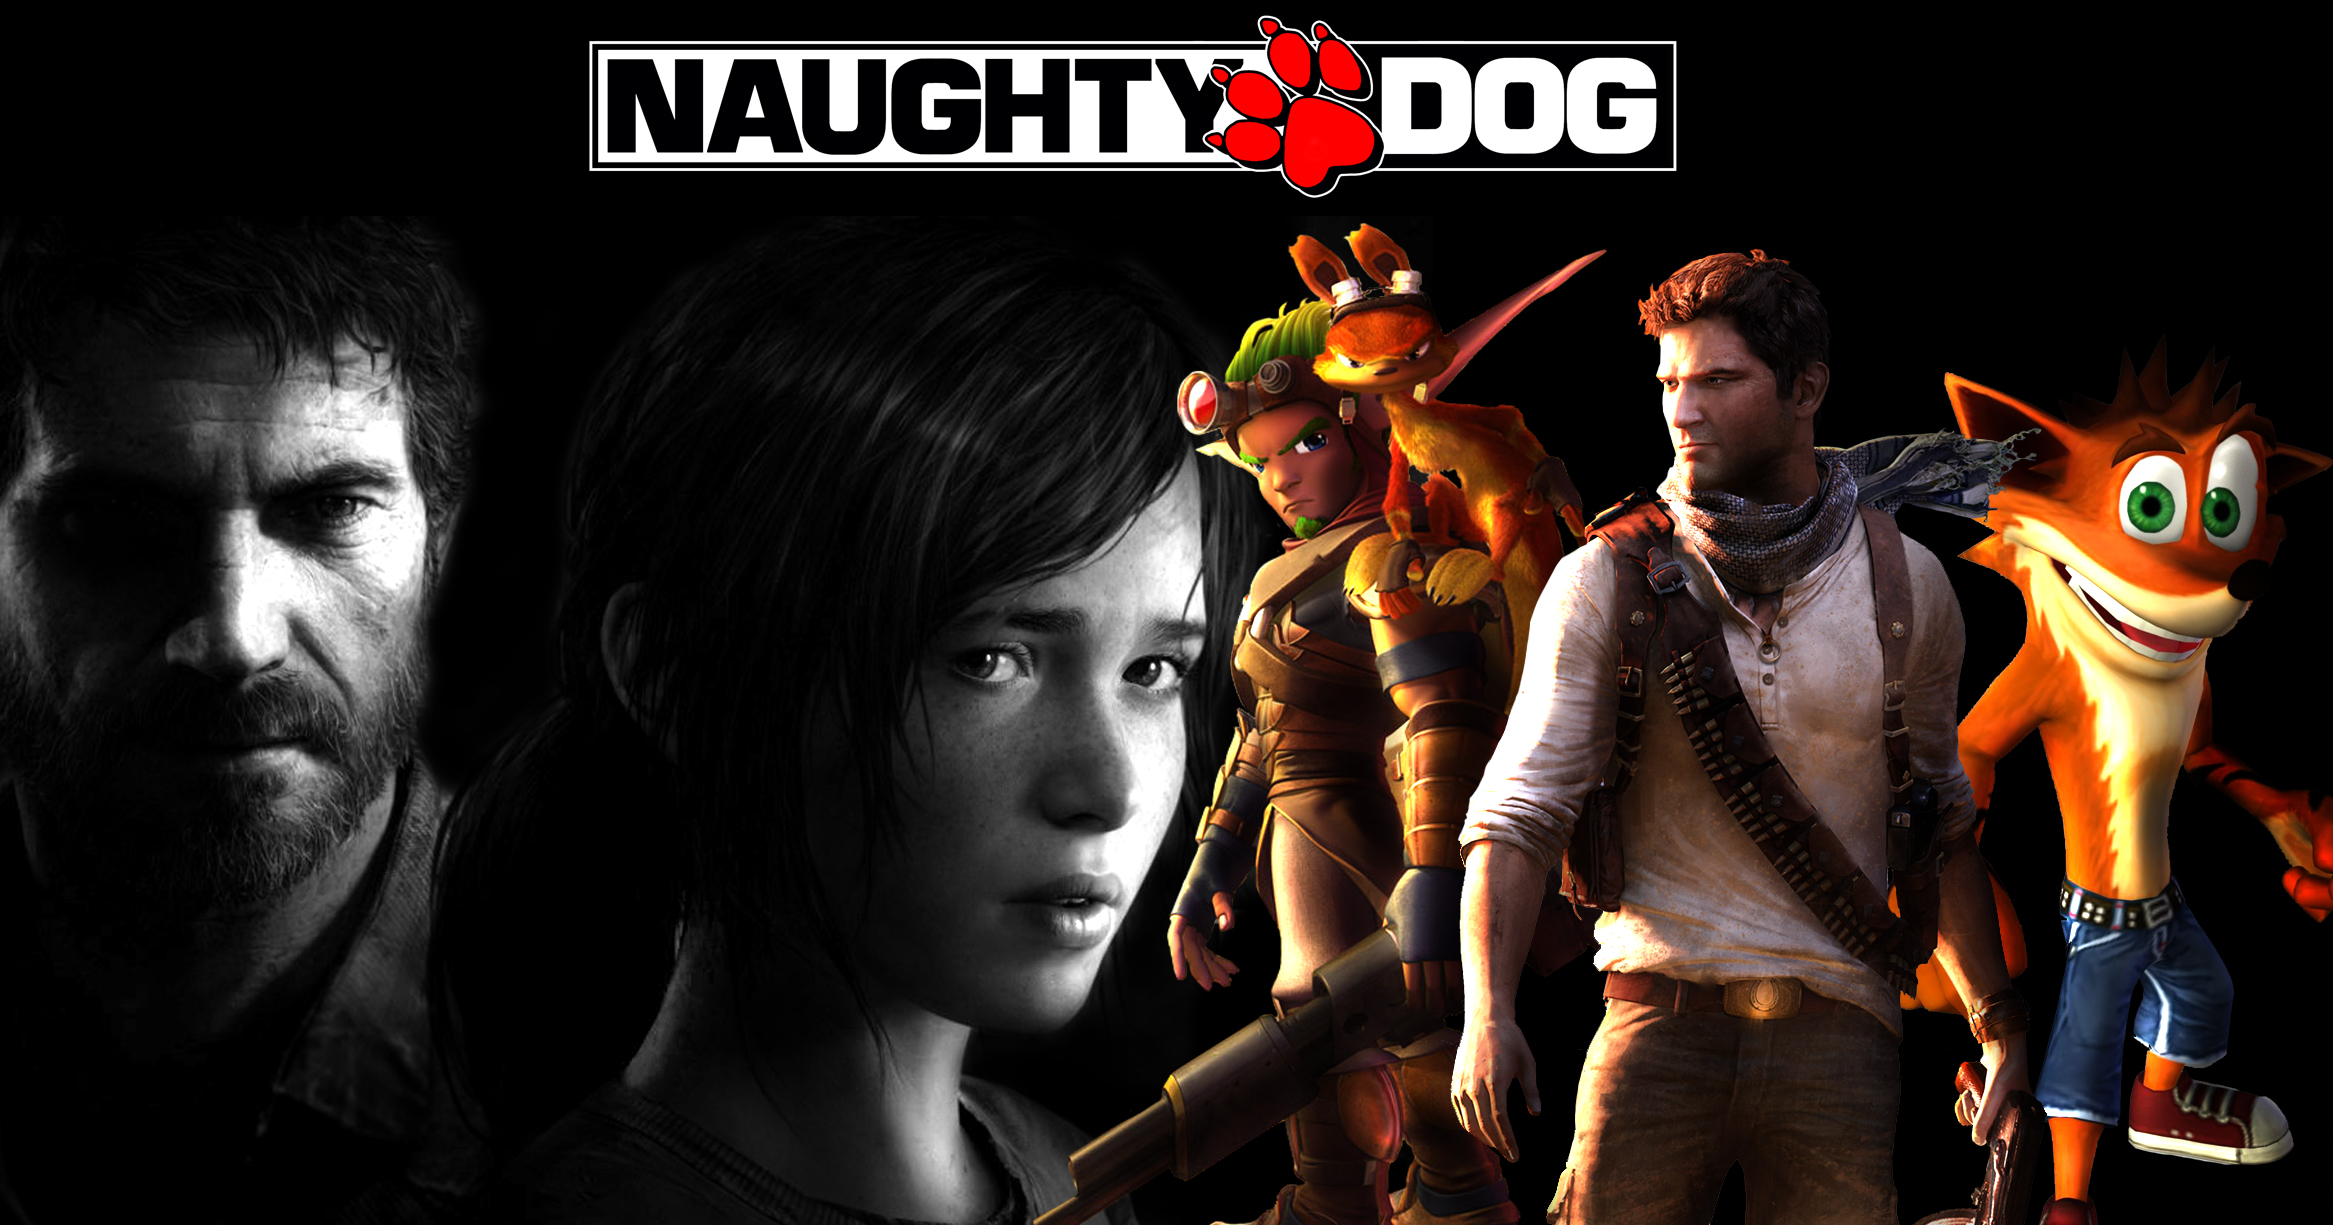 Gallery For Gt Naughty Dog Wallpaper